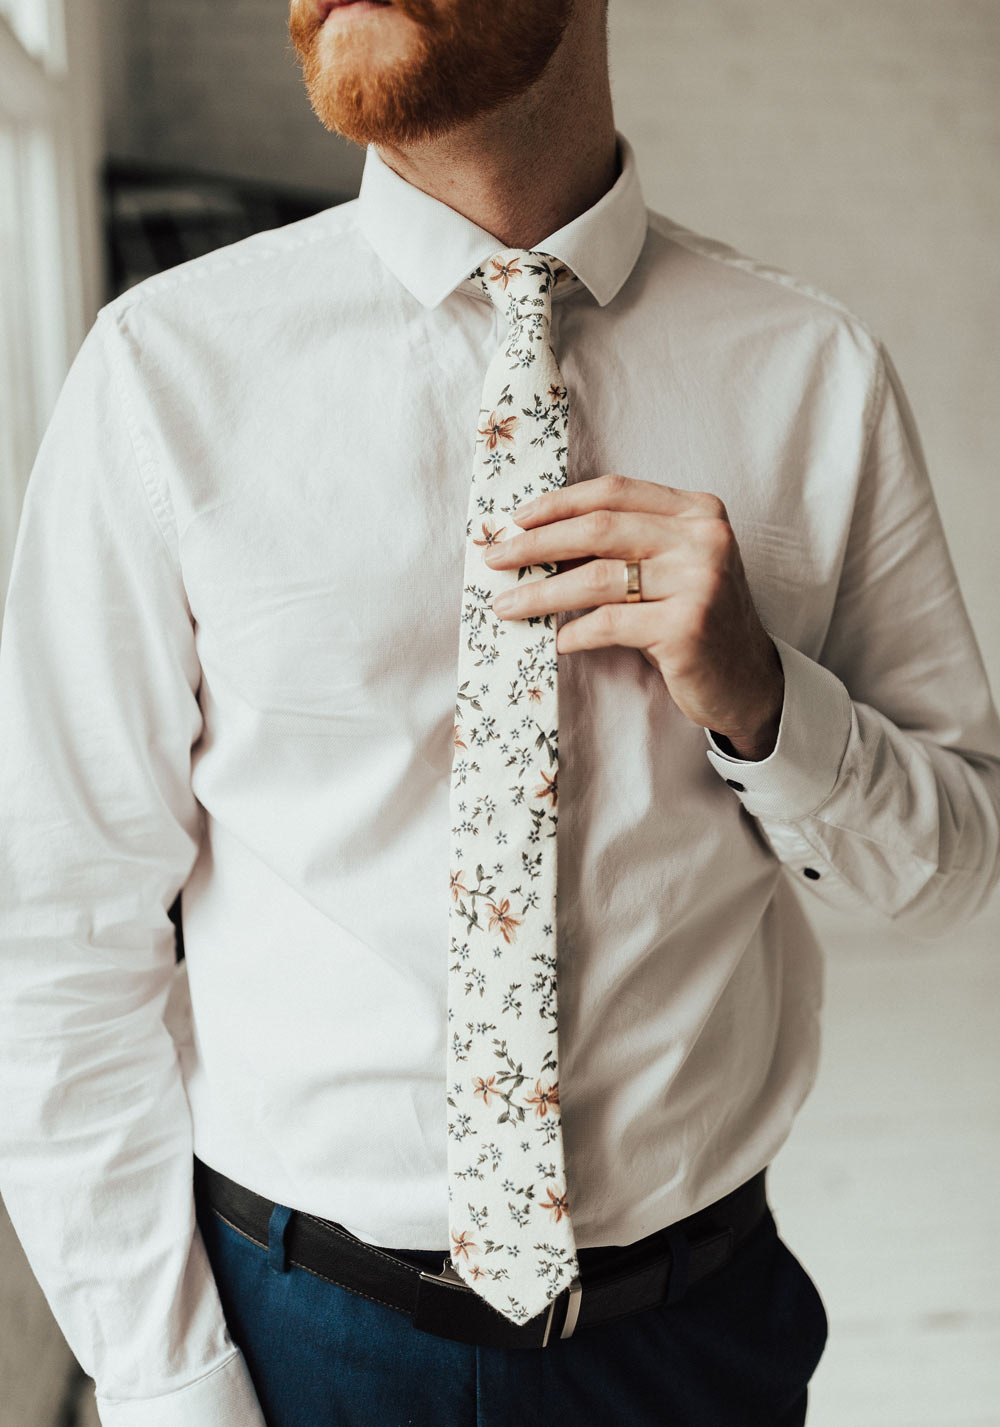 Sugar Blossom tie worn with a white shirt, dark brown belt and navy pants.